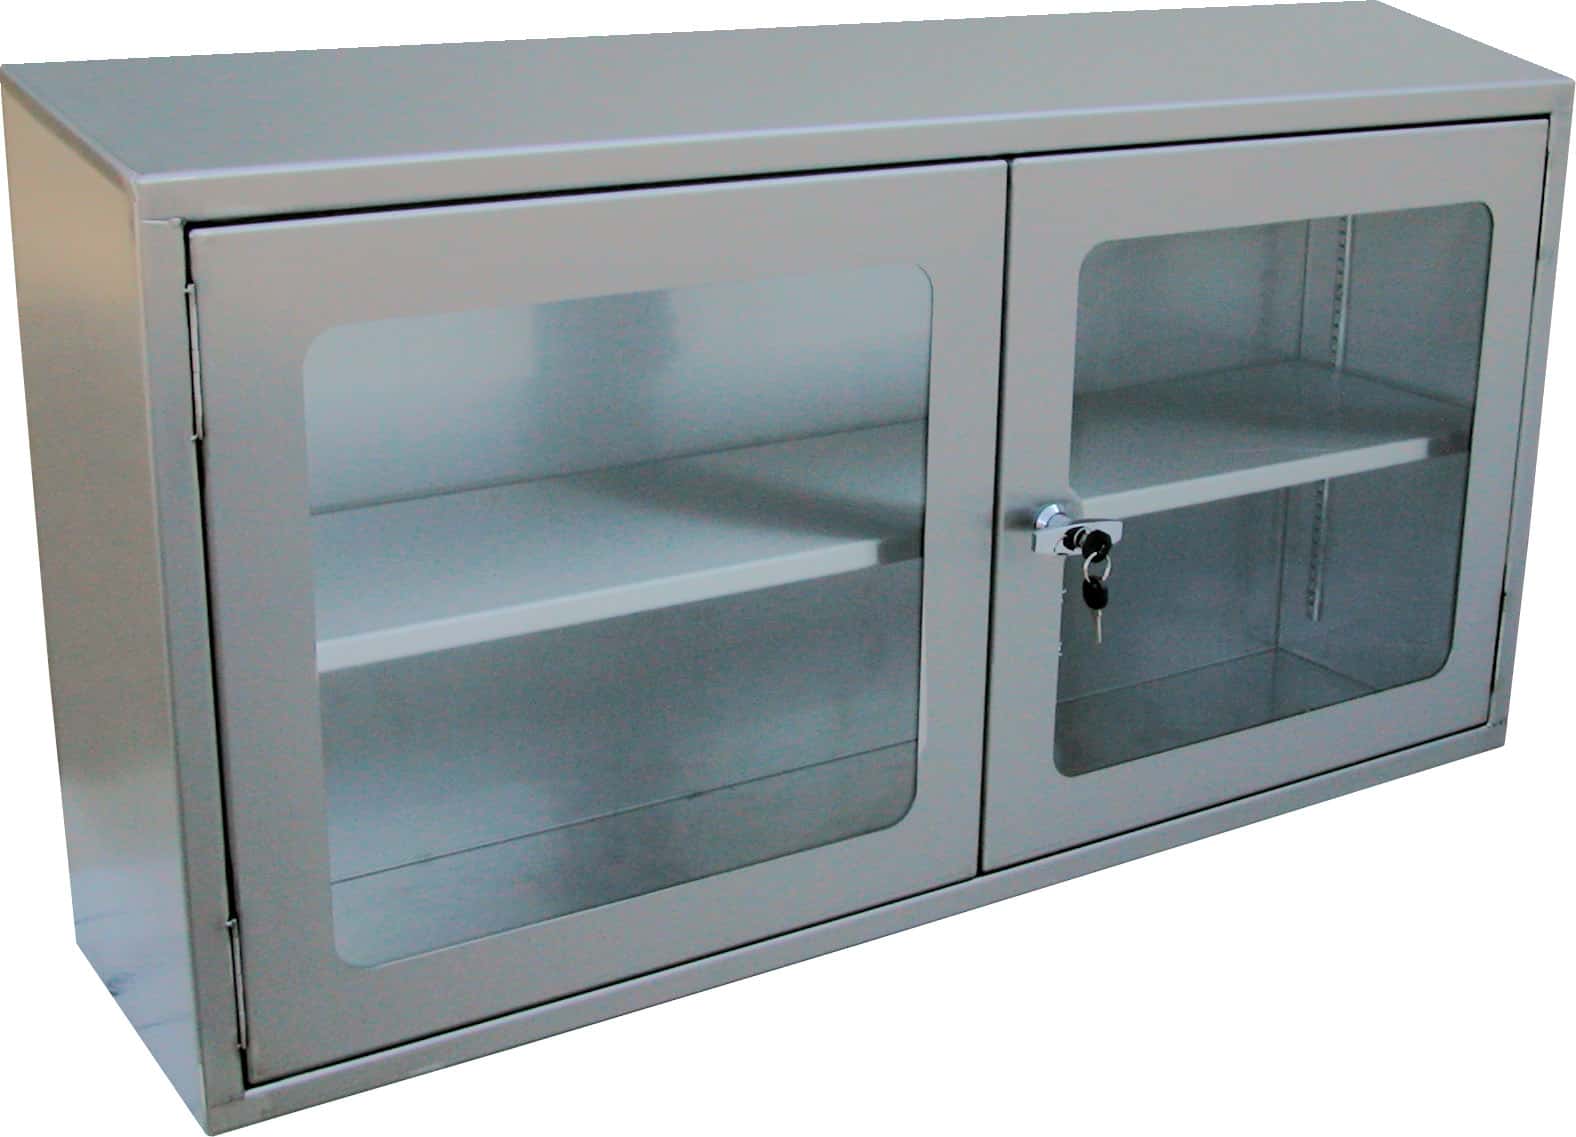 Hinged lockable wall cupboard with vision panel